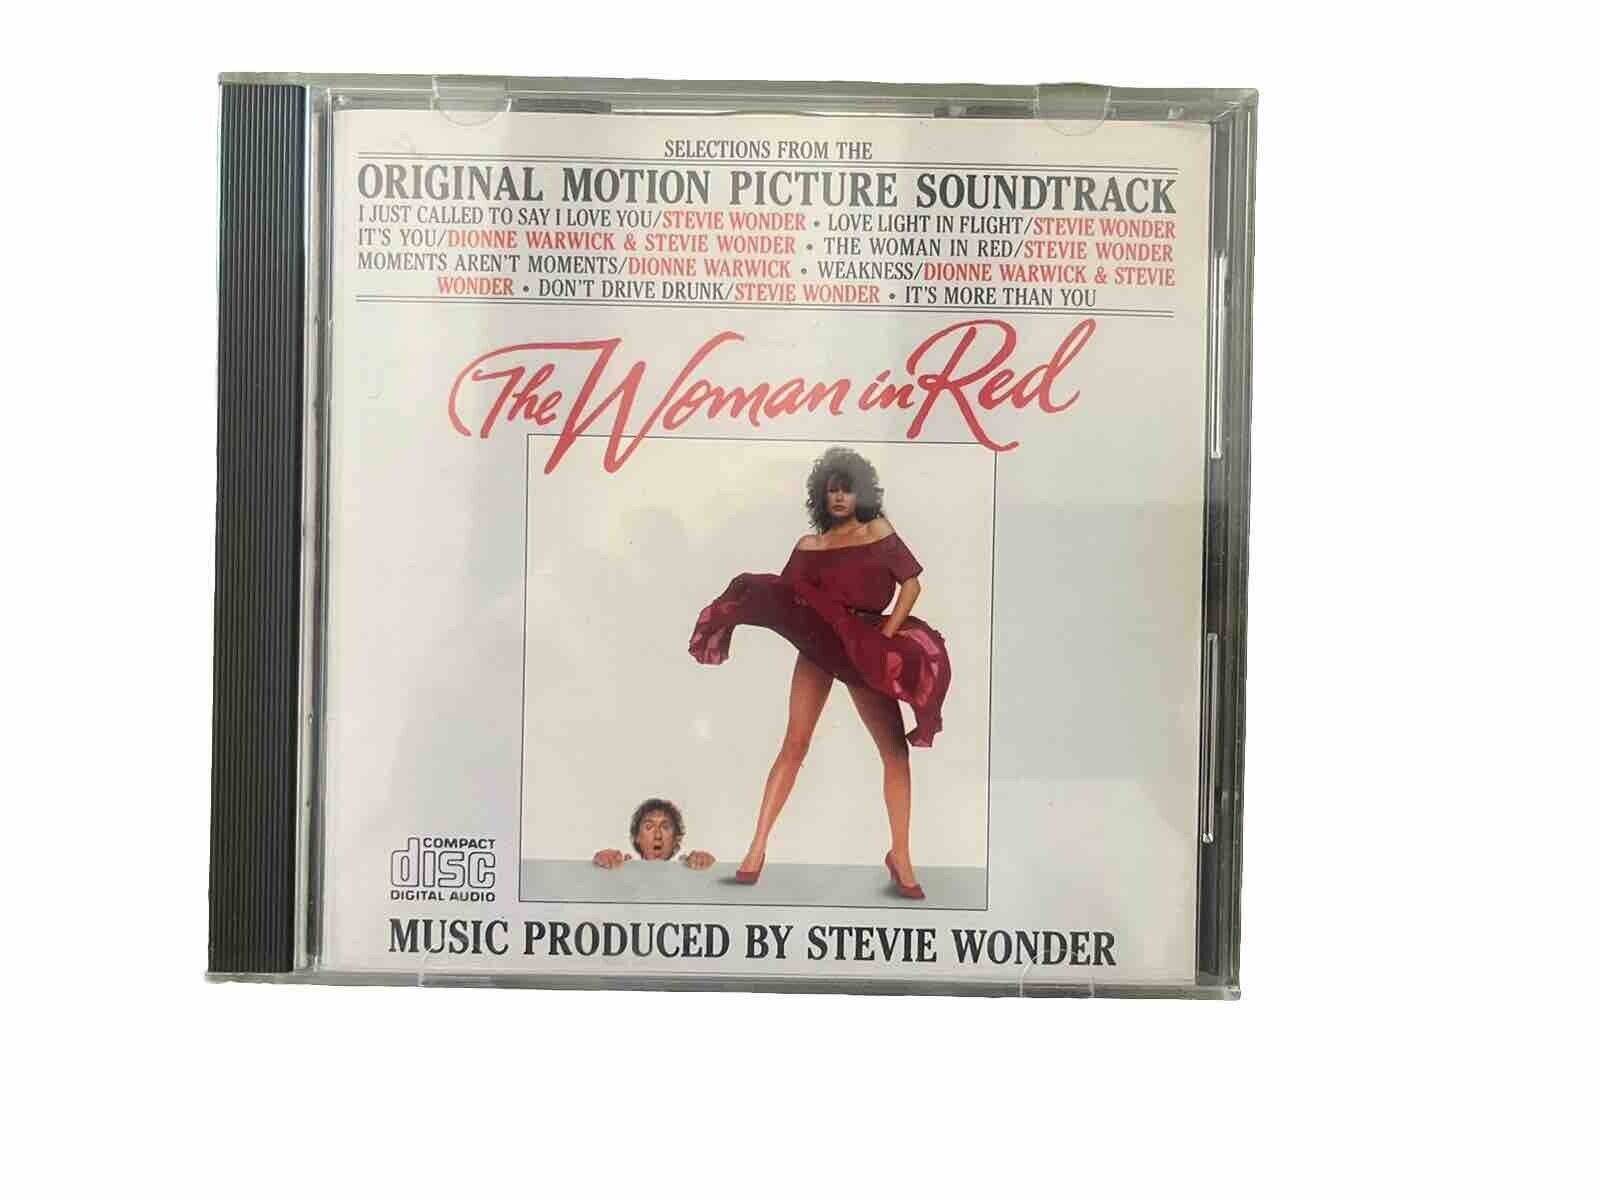 MINT The Woman In Red [Soundtrack] by Various (CD, 1984, Motown) Stevie Wonder